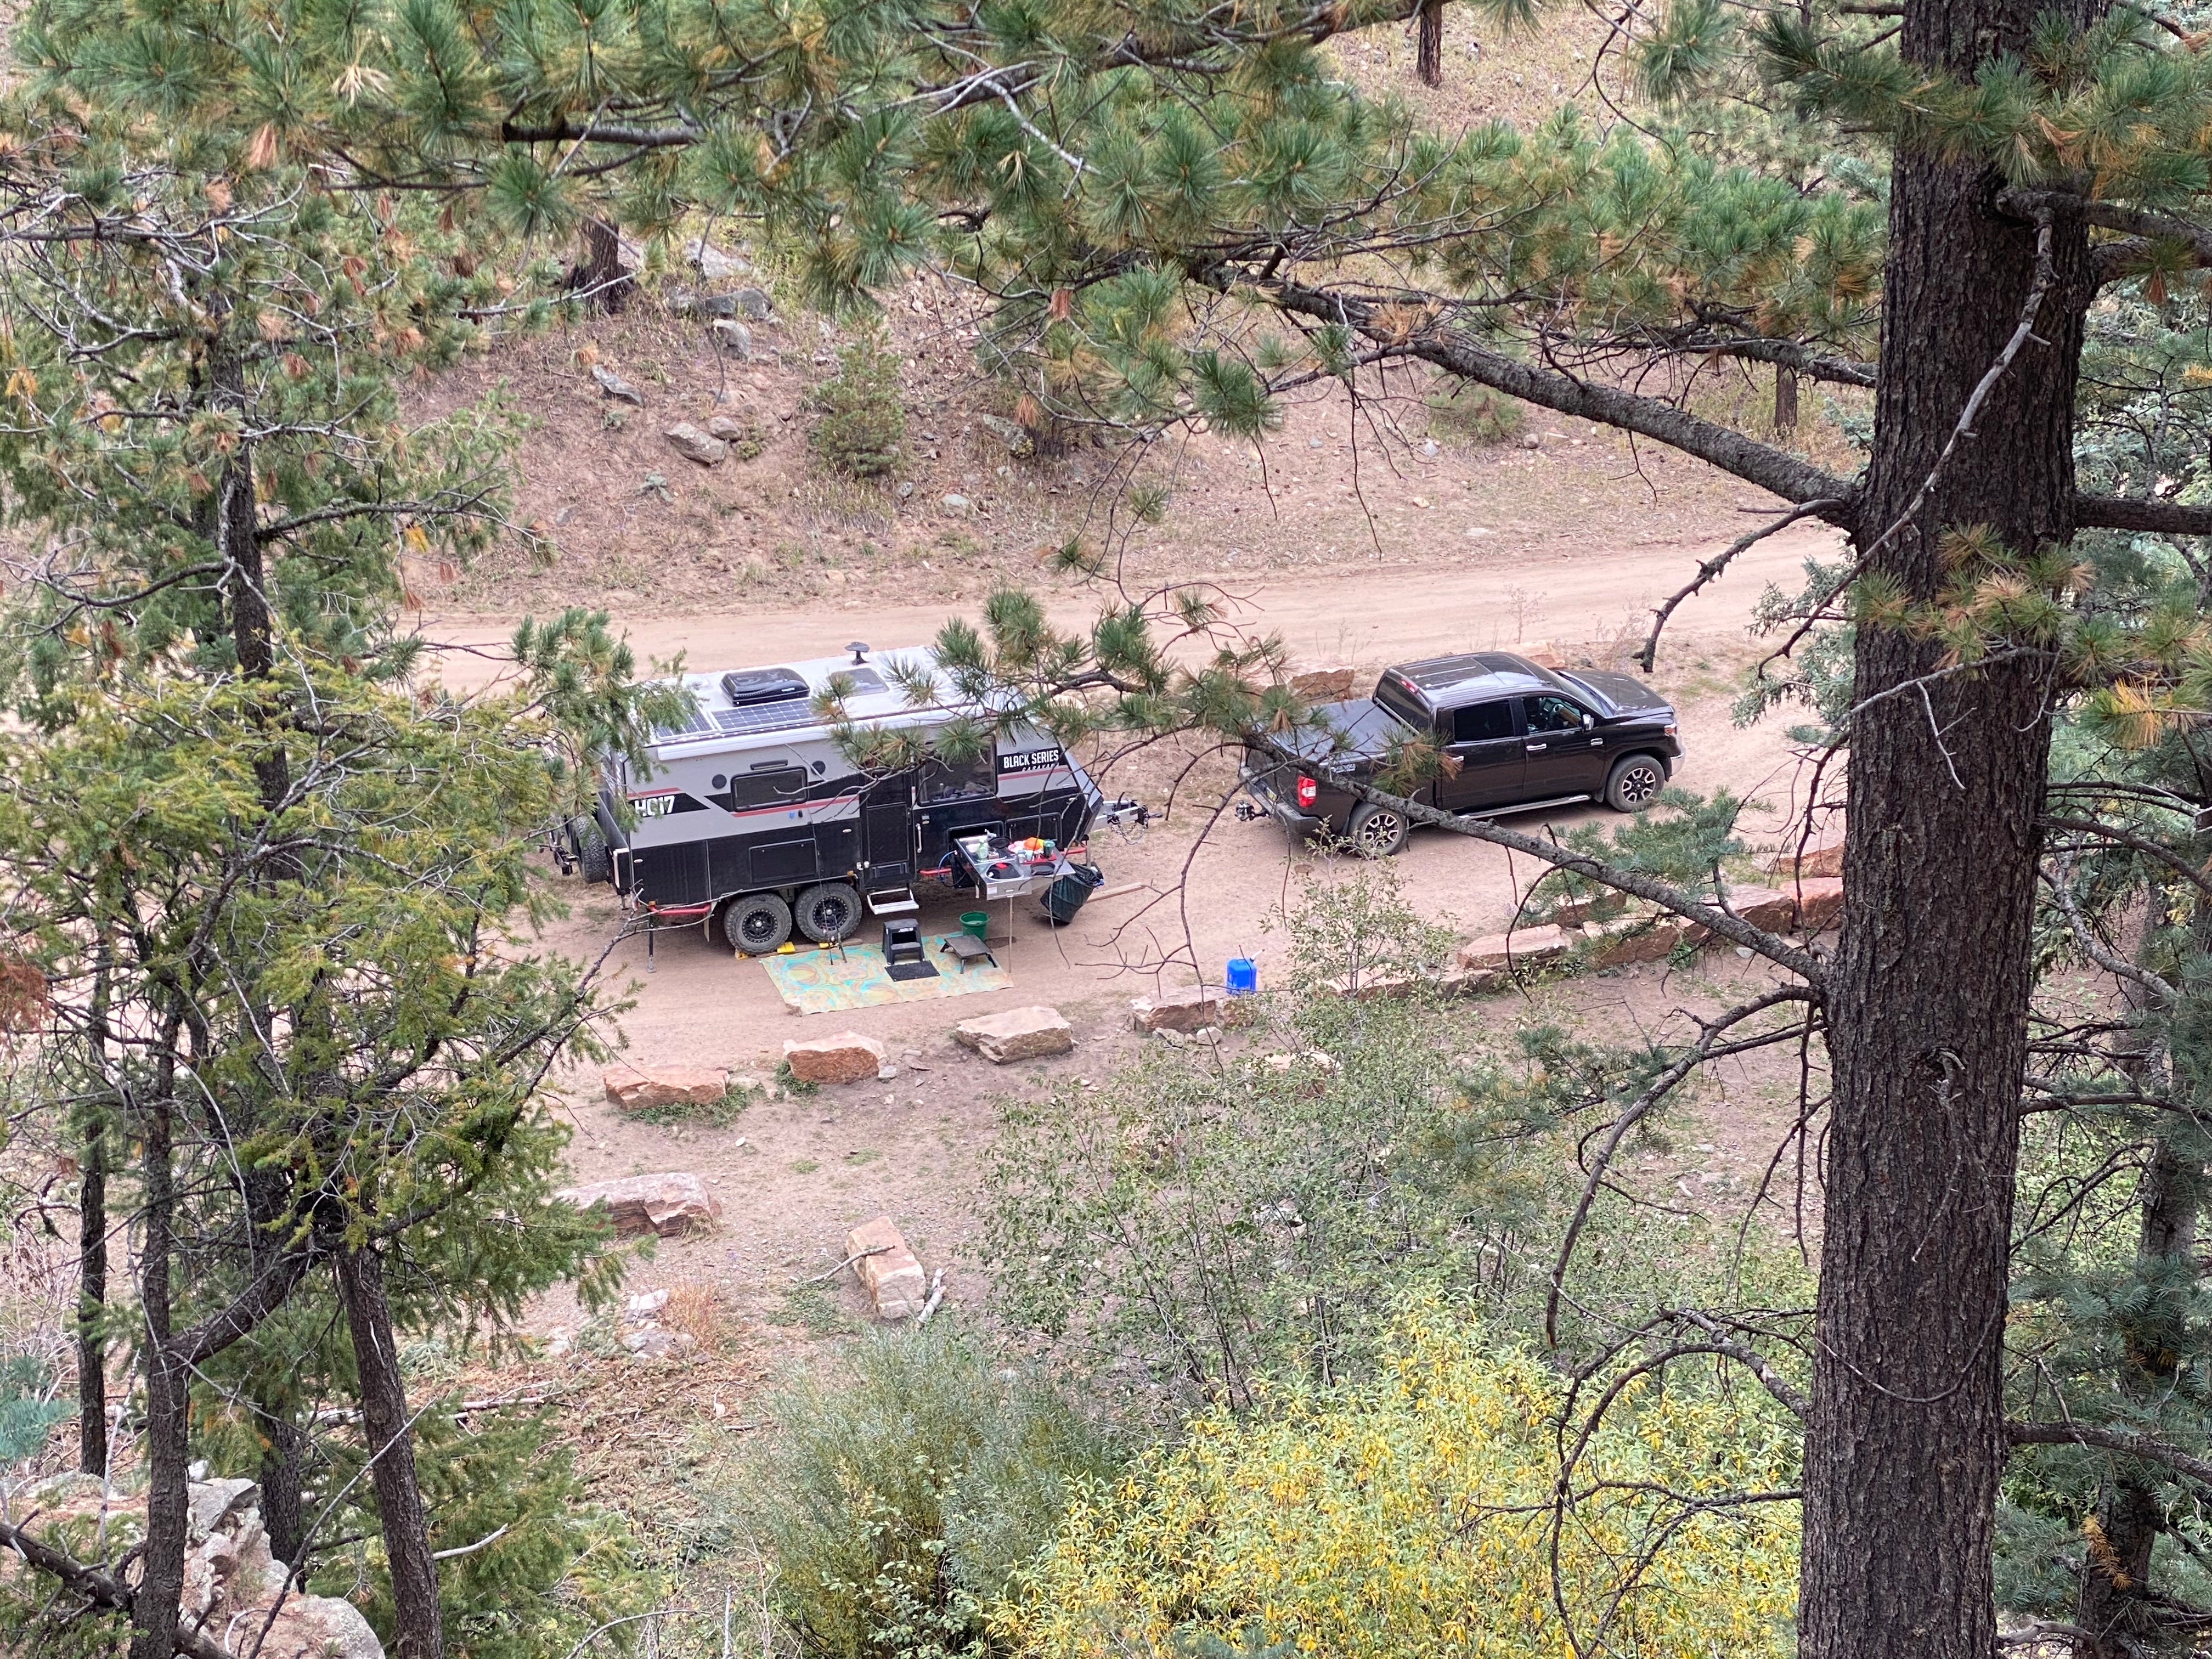 Camper submitted image from Cow Creek Dispersed Camping Area - 3